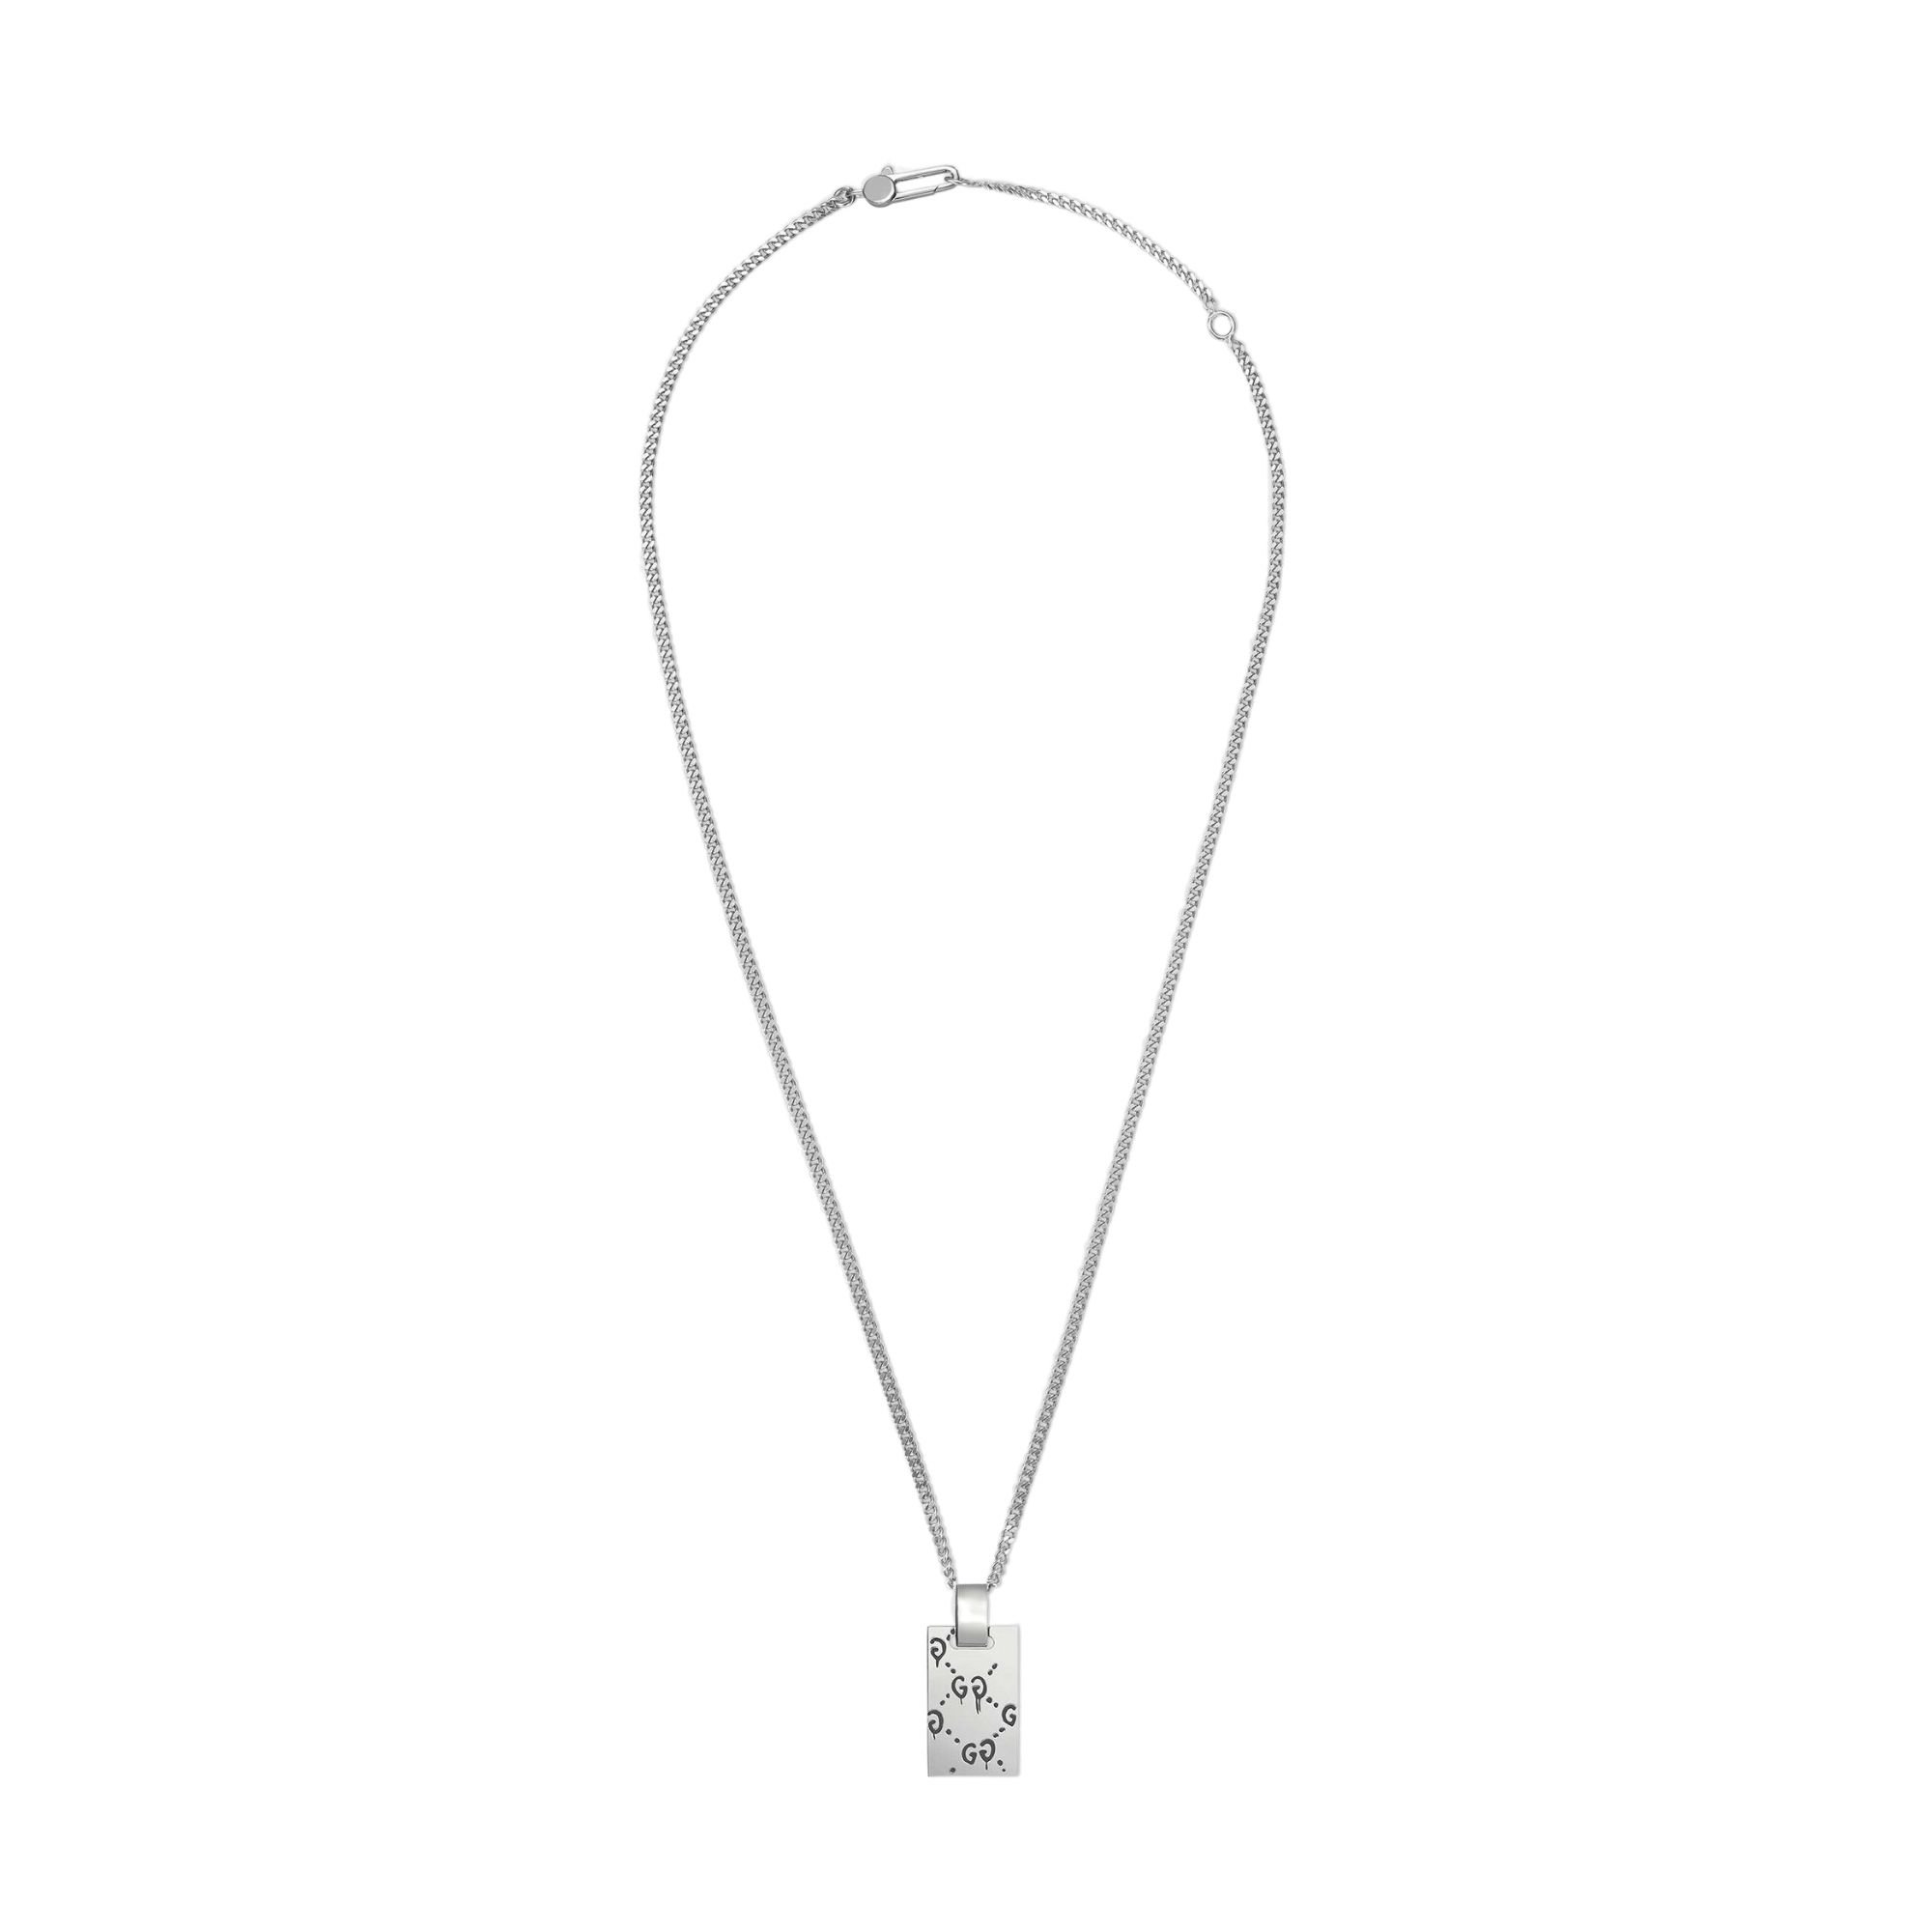 GUCCI GucciGhost skull silver necklace with pendant